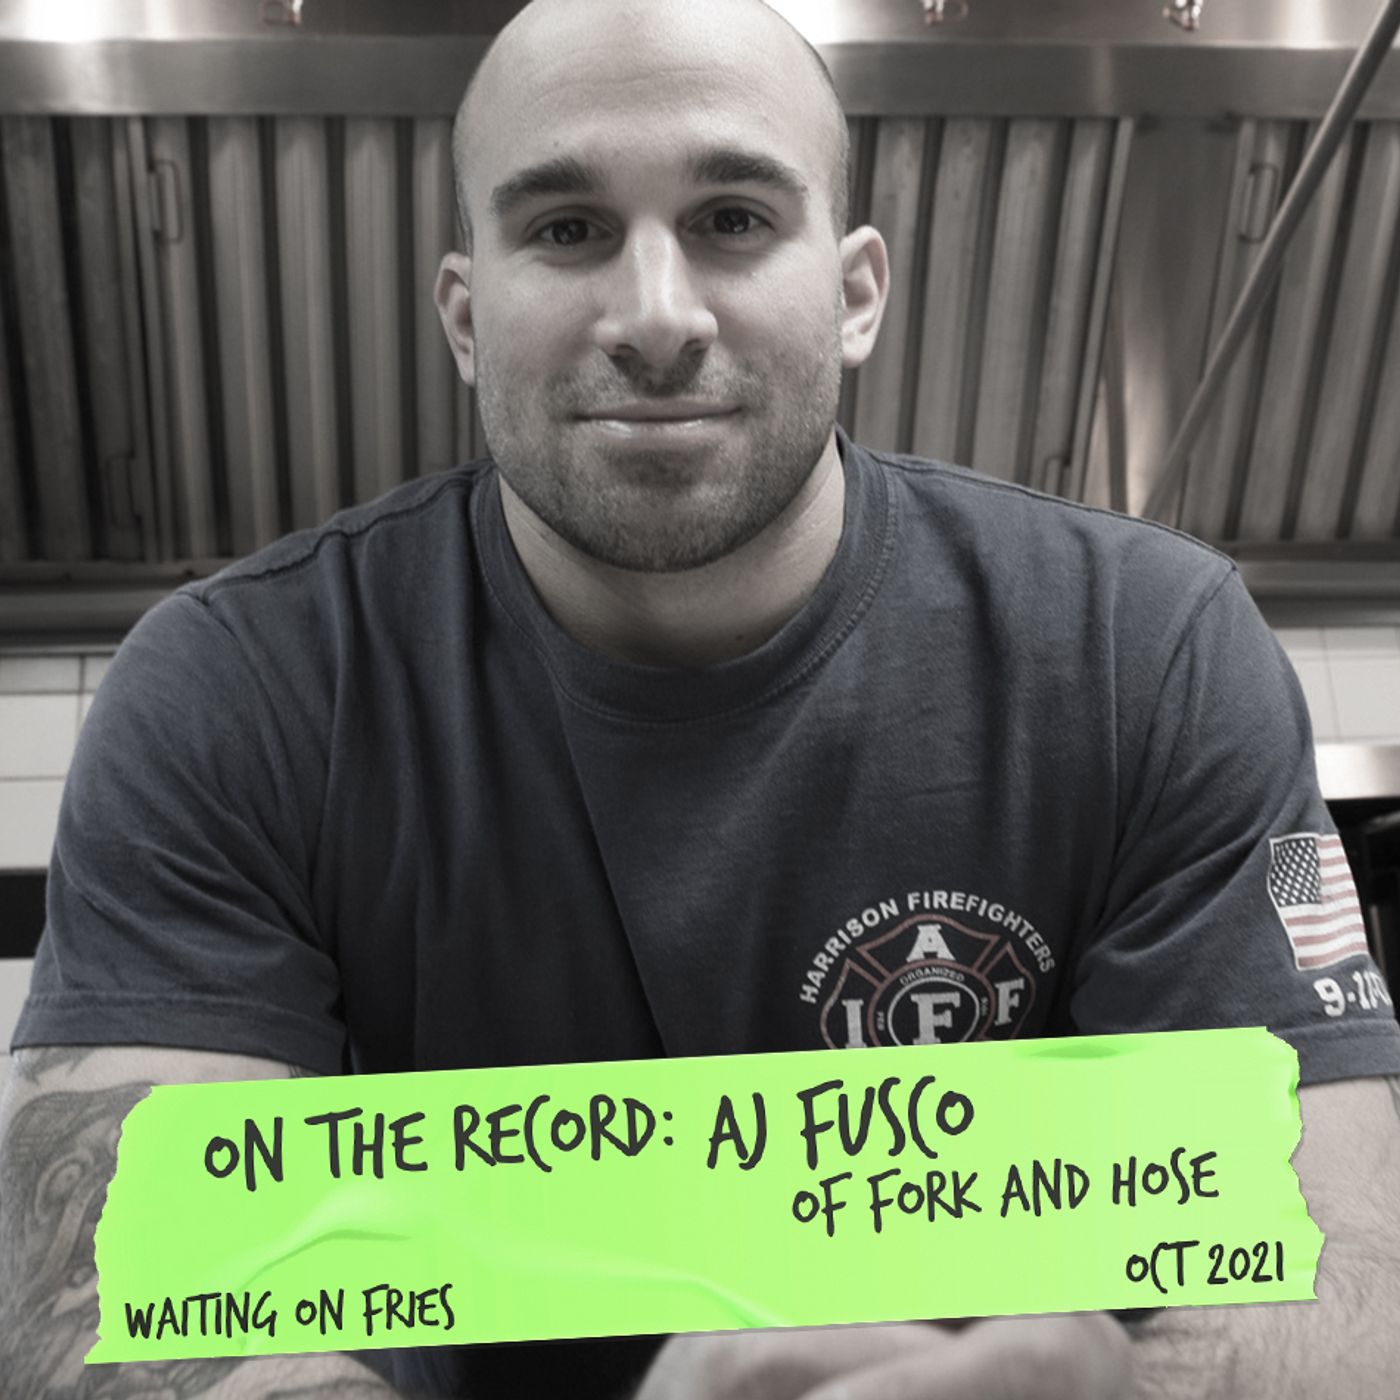 69: on the record: Fork and Hose w/ Firefighter AJ Fusco